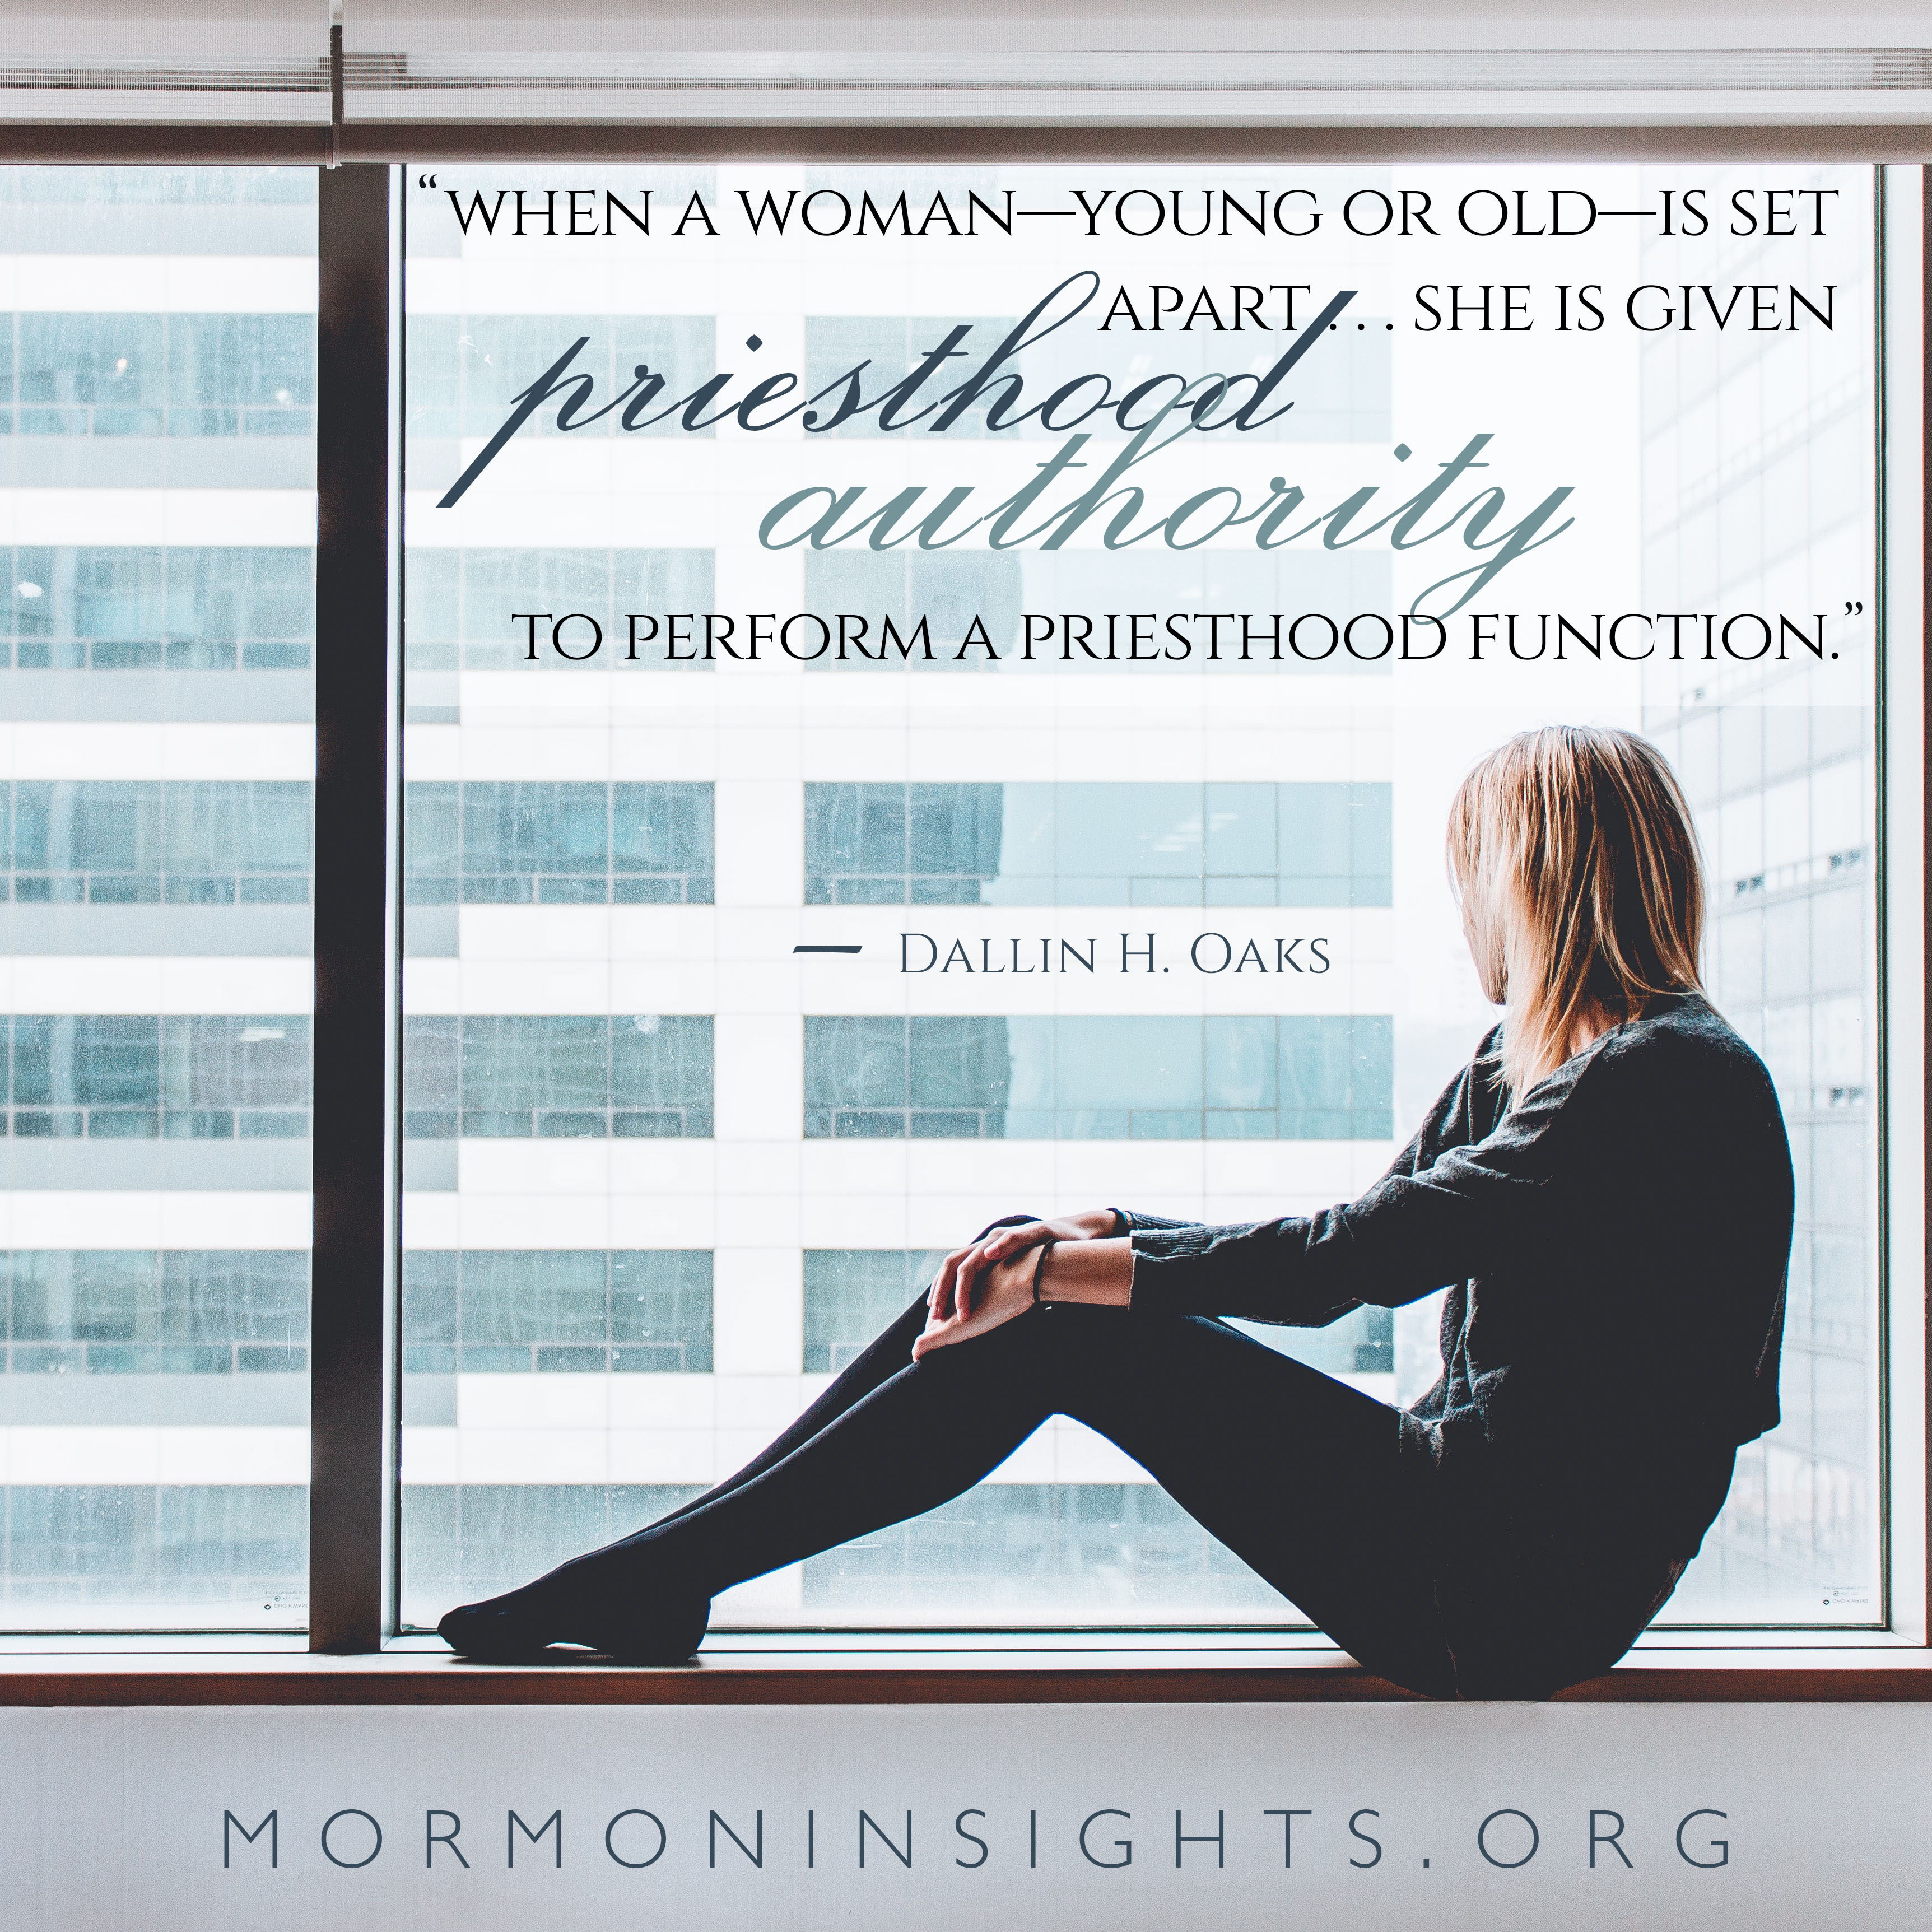 “ When a woman—young or old—is set apart . . . she is given priesthood authority to perform a priesthood function.” —Dallin H. Oaks